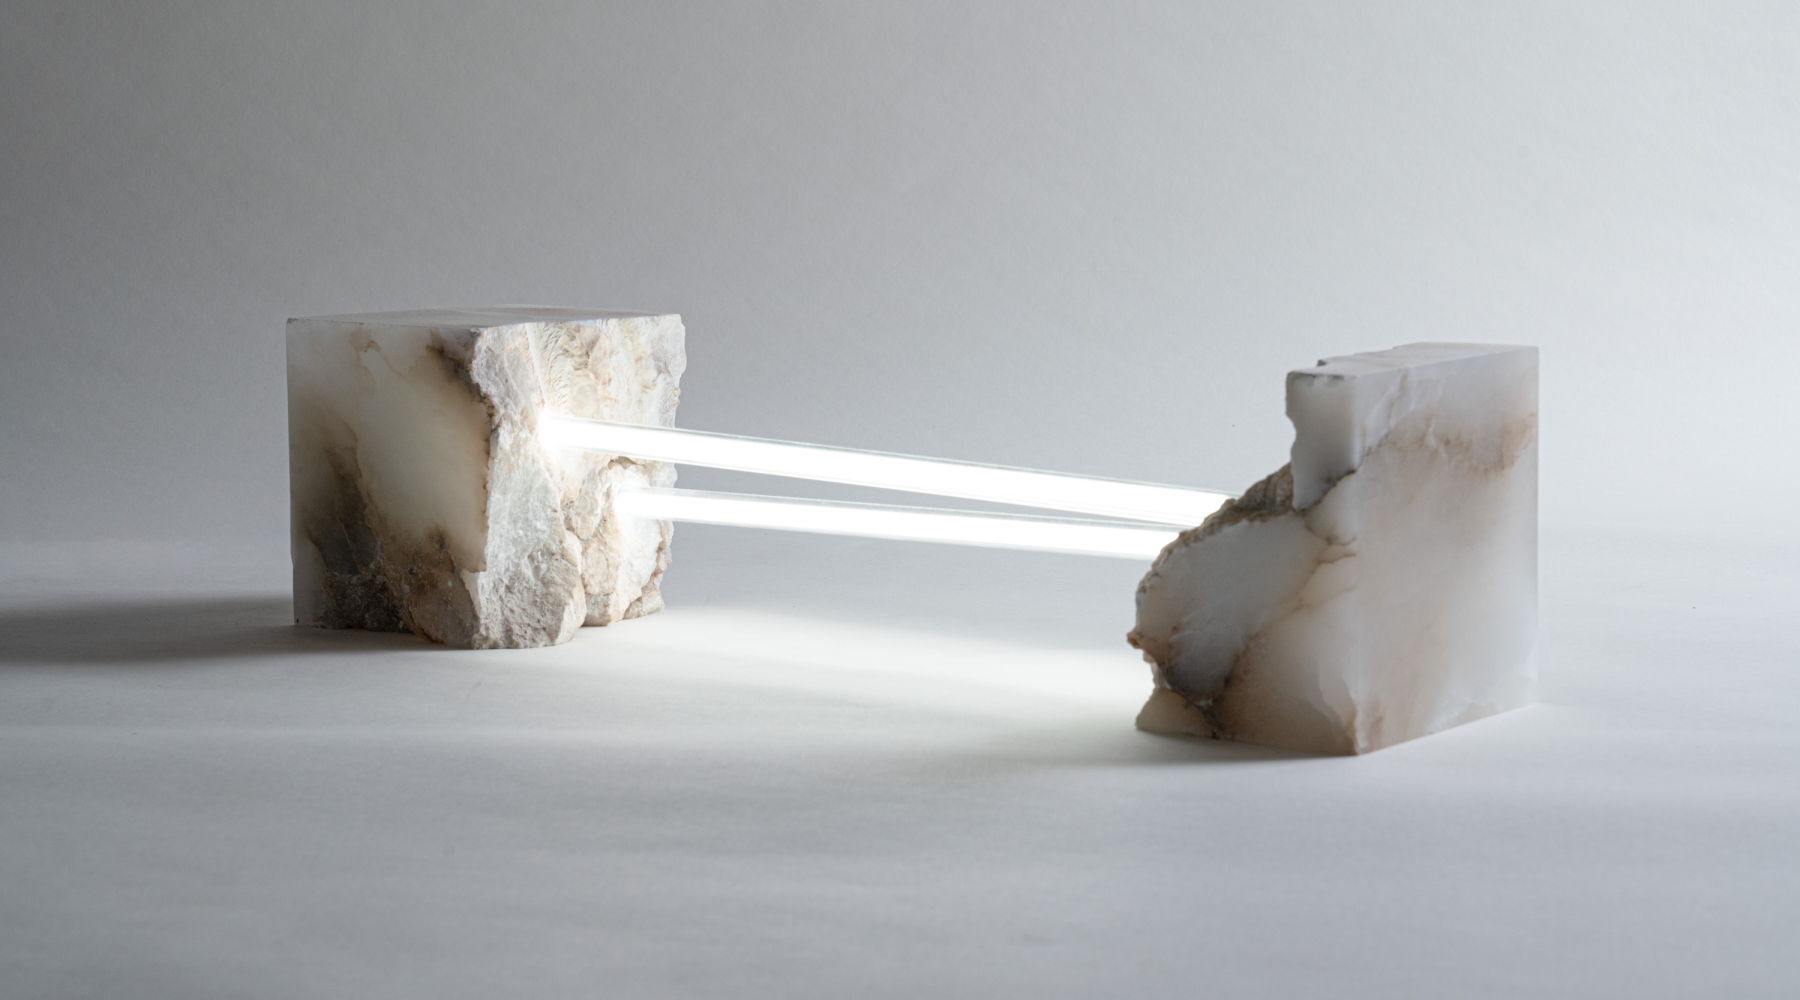 Marcus Vin&iacute;cius De Paula, Daphnis, 2020, Italian alabaster and triphosphor coated glass filled with argon and mercury, 24 x 6 x 6 in.